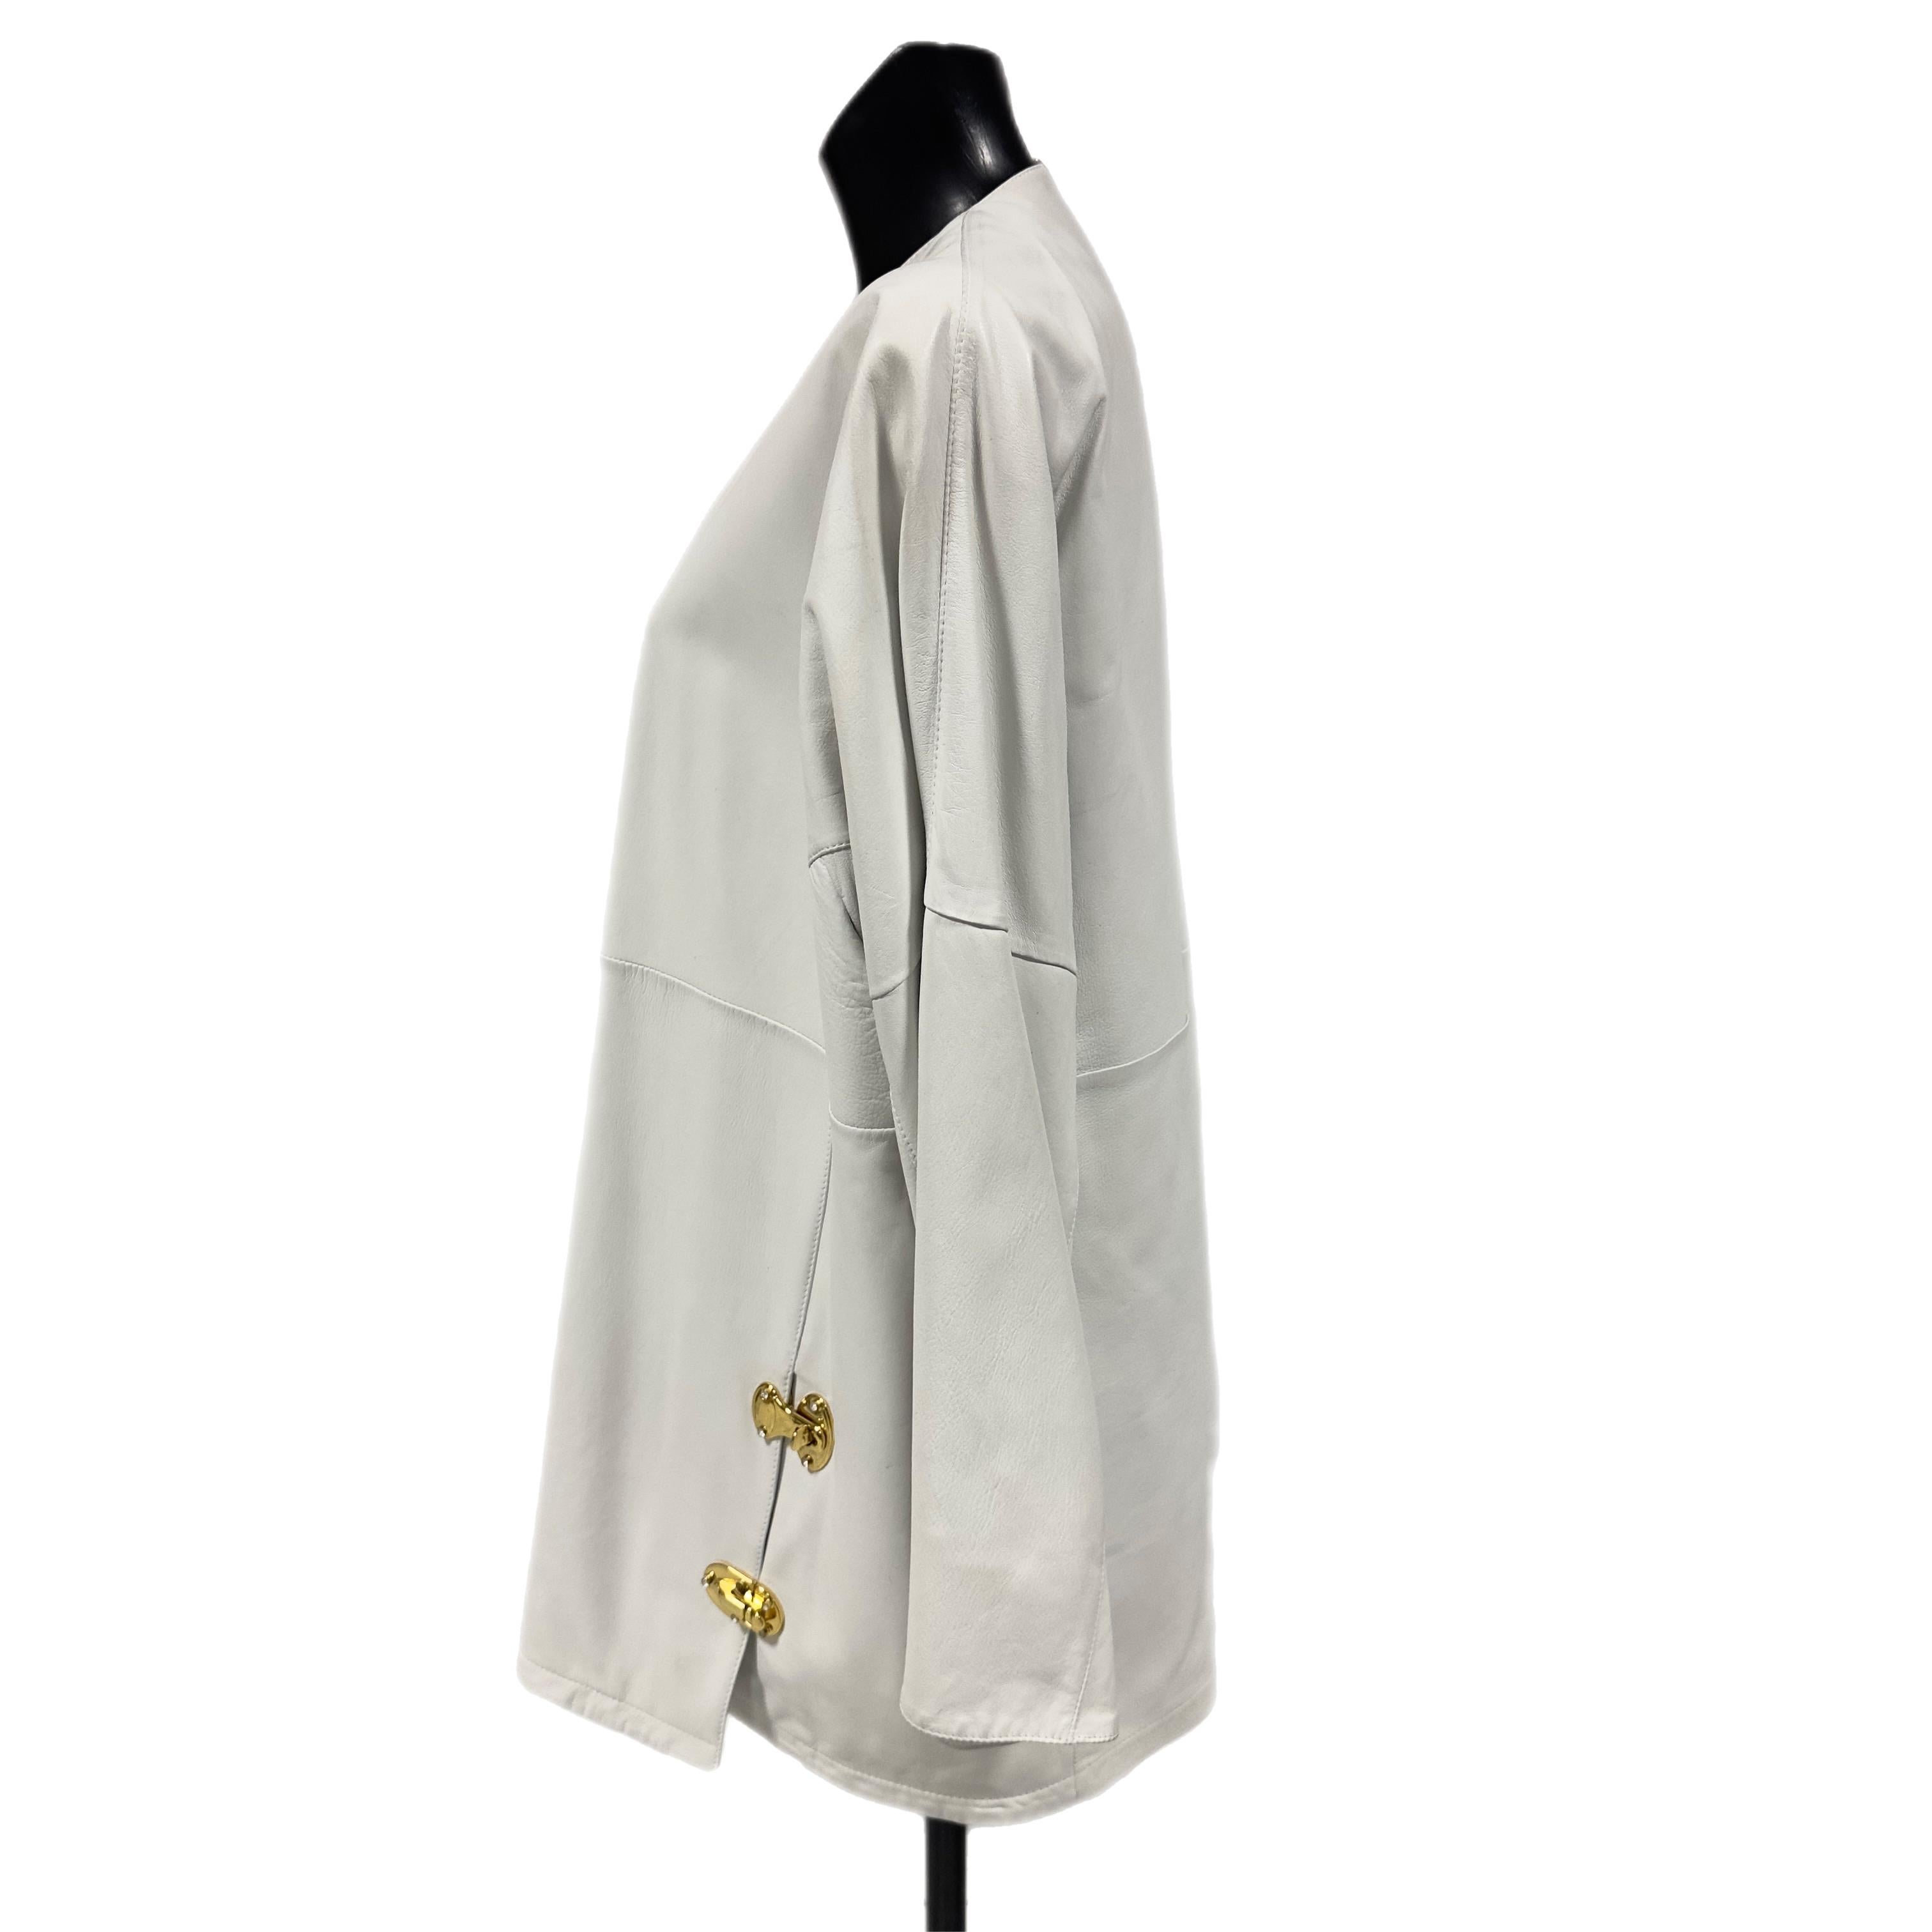  golden side hooks are a stylish detail that makes a difference on a white leather over jacket. These small, often underestimated accessories can add a touch of elegance and sophistication to an already versatile garment. The gold hooks blend